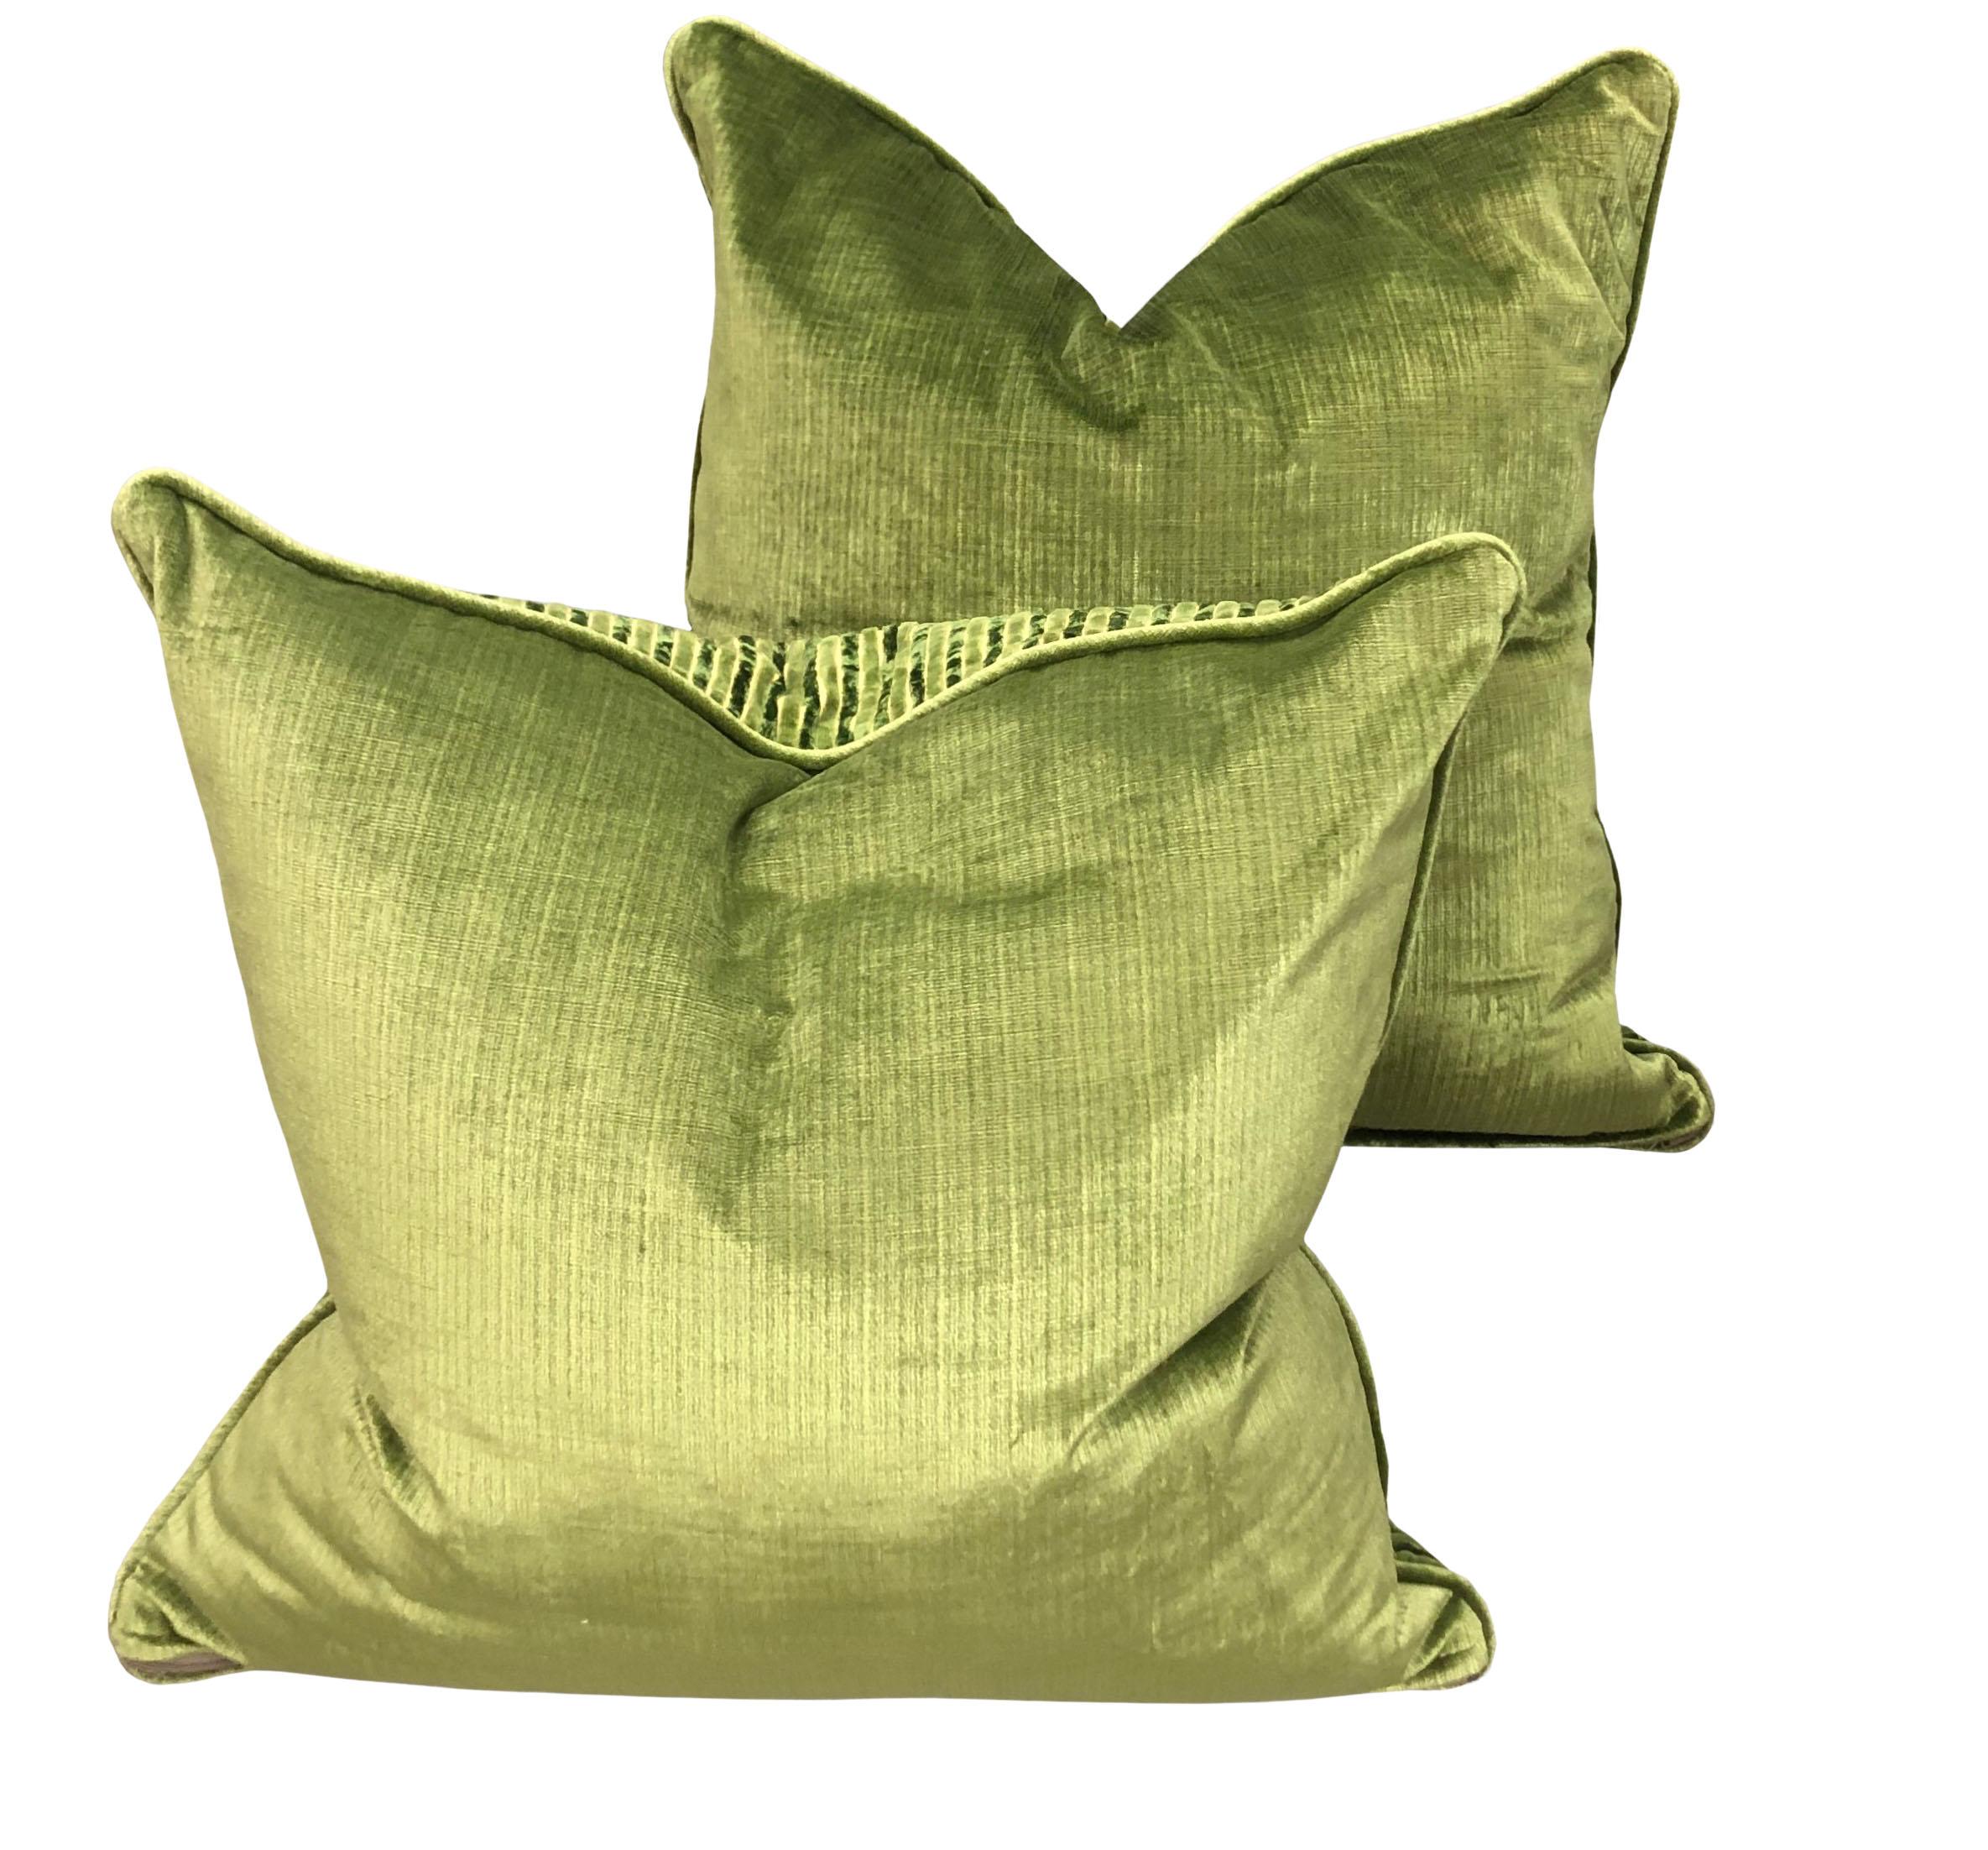 Salamandré Green Stripe Pillows In Good Condition For Sale In Tampa, FL